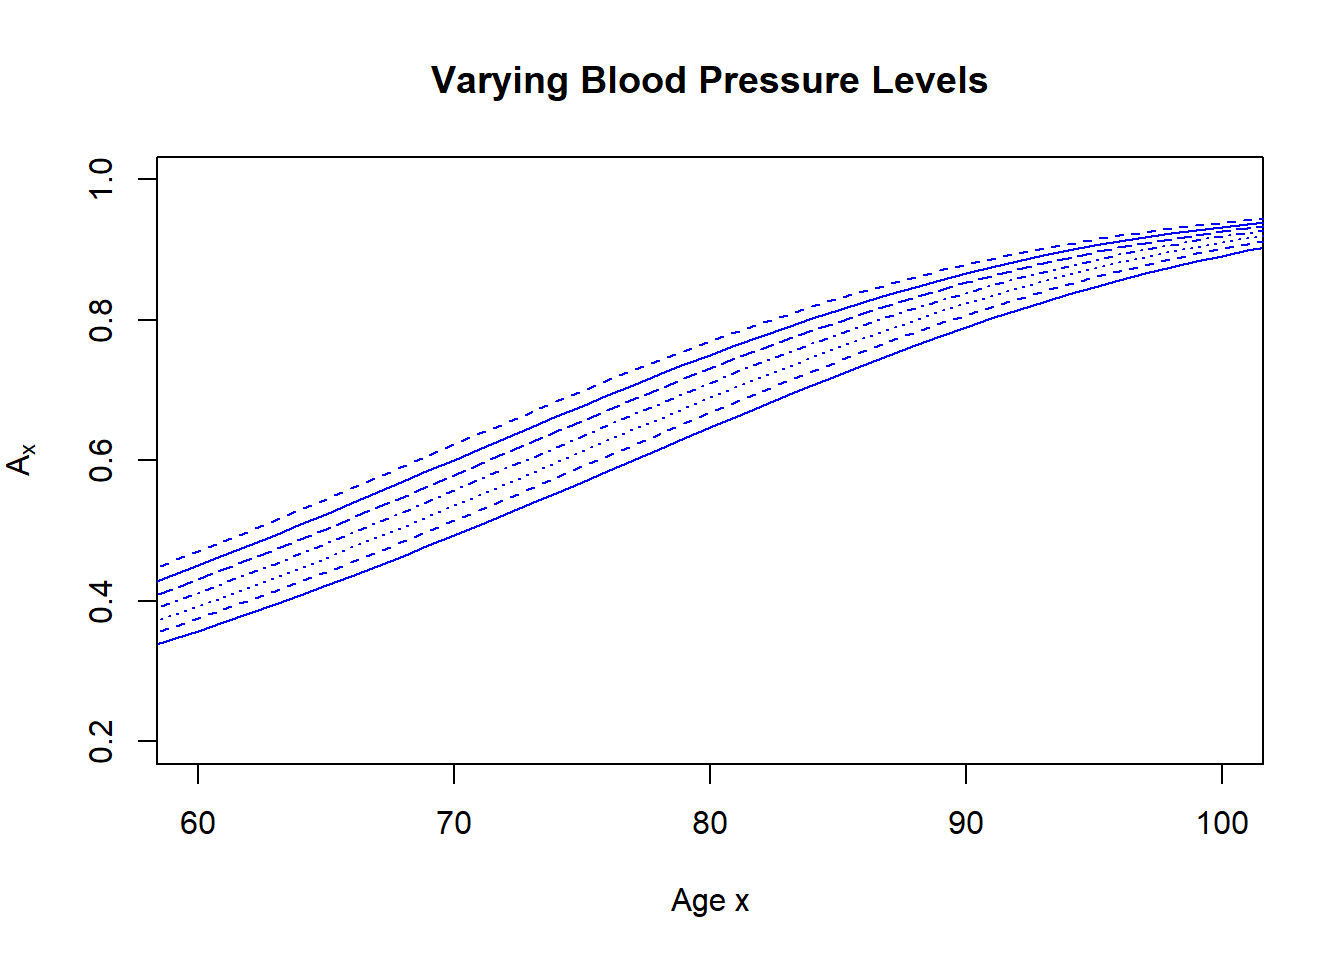 Life Insurance by Age and Plood Pressure. A plot of expected presented values \(A_x\) by age \(x\). The lower thick line represents the lowest level of blood pressure, the upper line represents the highest level of blood pressure.